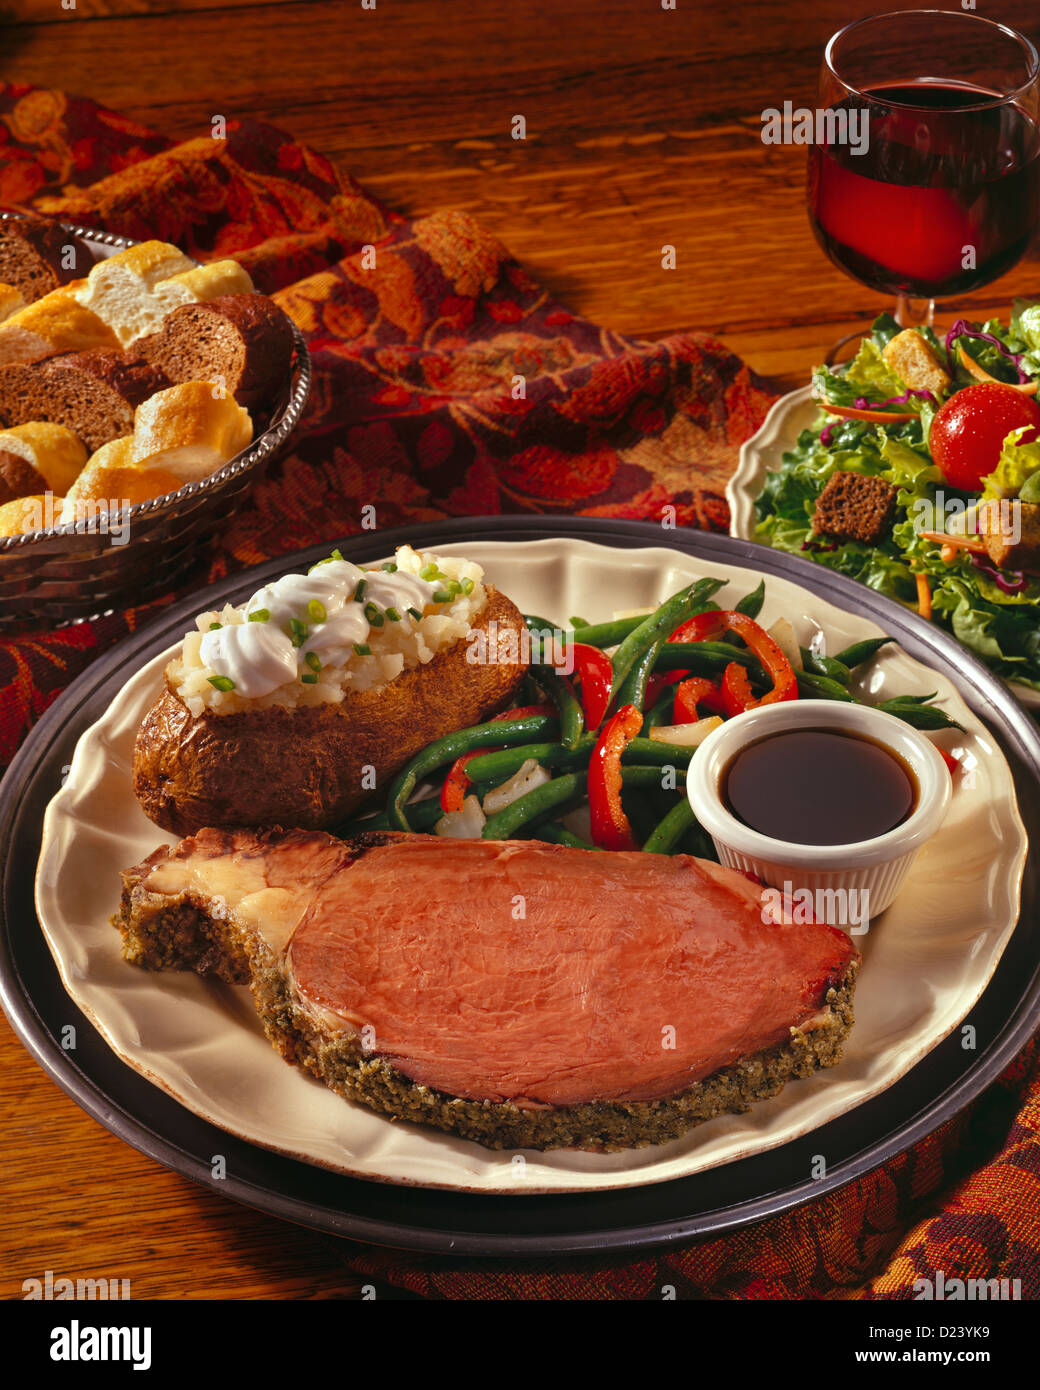 Prime Rib Dinner With A Loaded Baked Potato Vegetables Salad And A Glass Of Red Wine Stock Photo Alamy